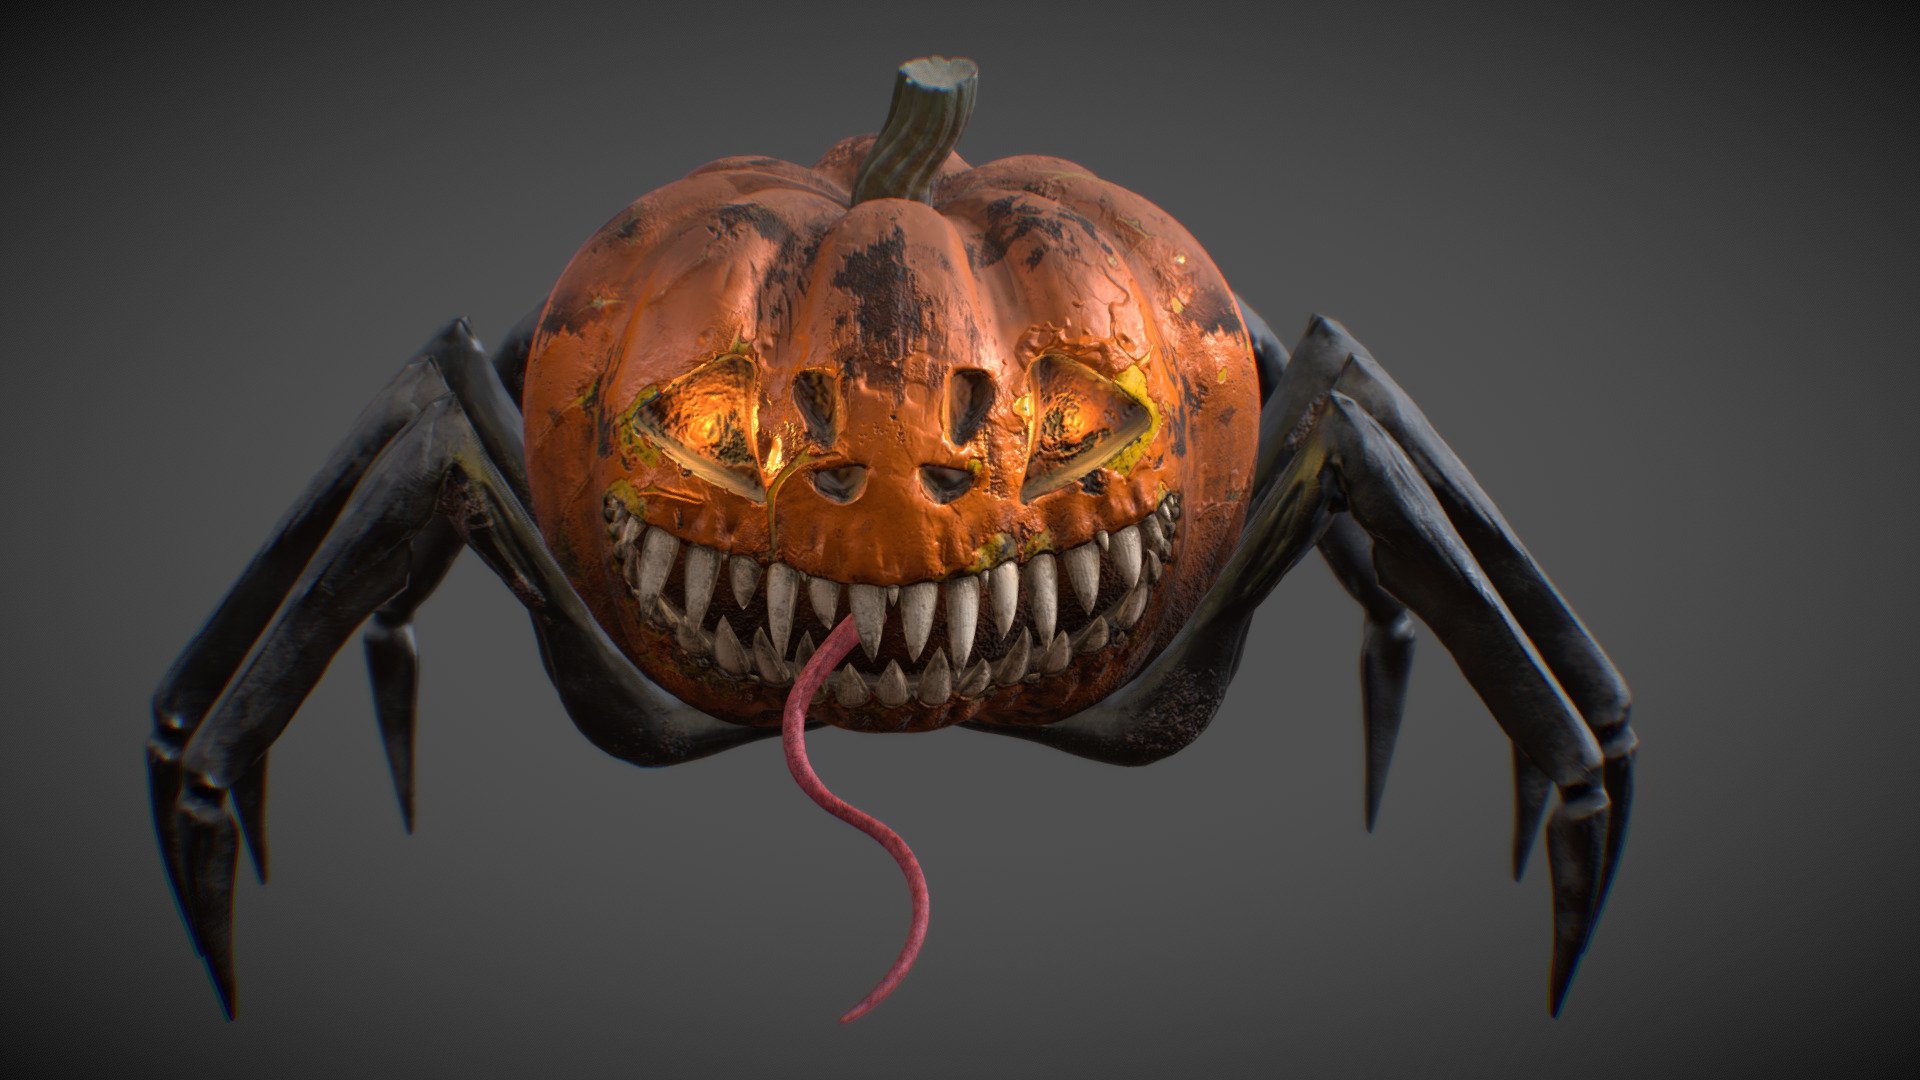 This is a spider pumpkin model that loves sweets, but at the same time will not give up on you.

Including the BLEND, FBX and OBJ formats.

With Diffuse, Specular, Roughness, Metallic and Normal map textures.

The low-poly game is ready

Polygons 37193

Vertexes 37305

Textures are displayed in sizes from 512x128 to 4096x4096.

Created in Blender

Support my in ArtStation: https://www.artstation.com/artwork/39Bd4E - Halloween Spider Pumpkin - Download Free 3D model by gloomDelusion (@GlomDel) 3d model